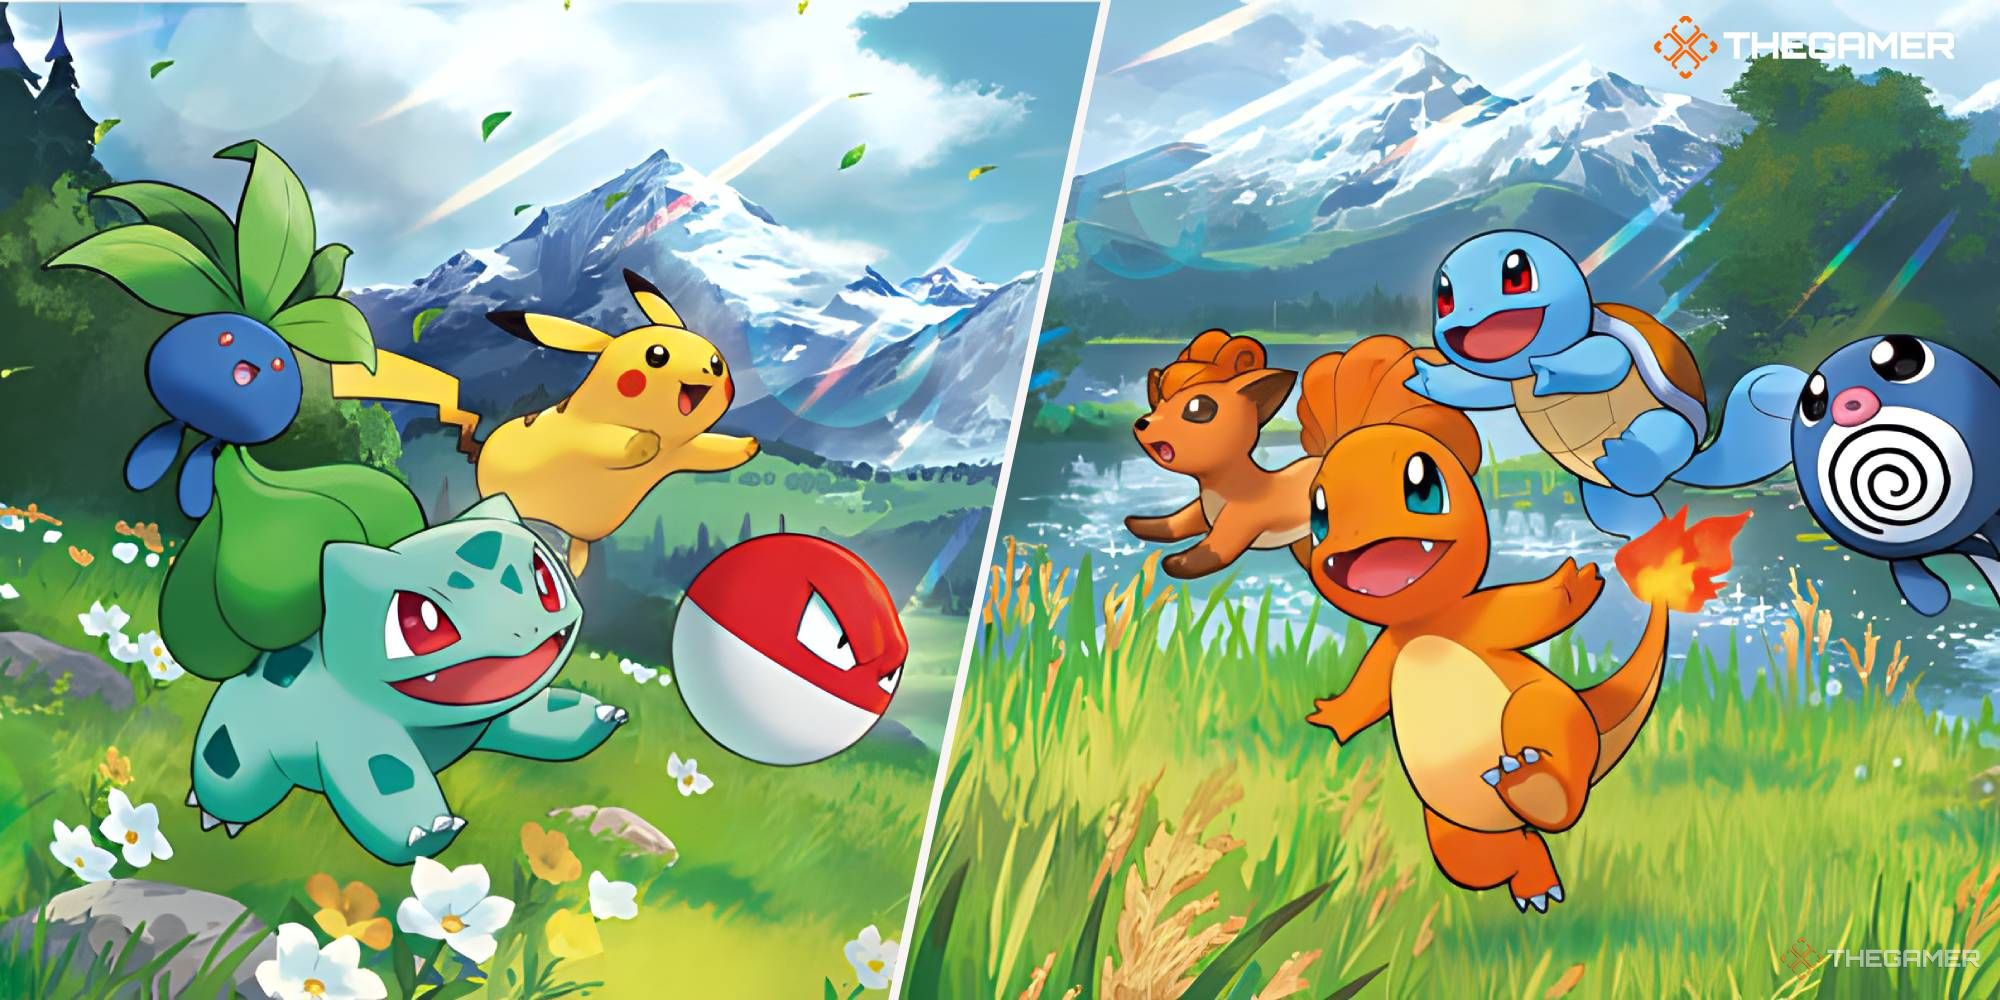 A variety of Pokemon frolicking in a field.